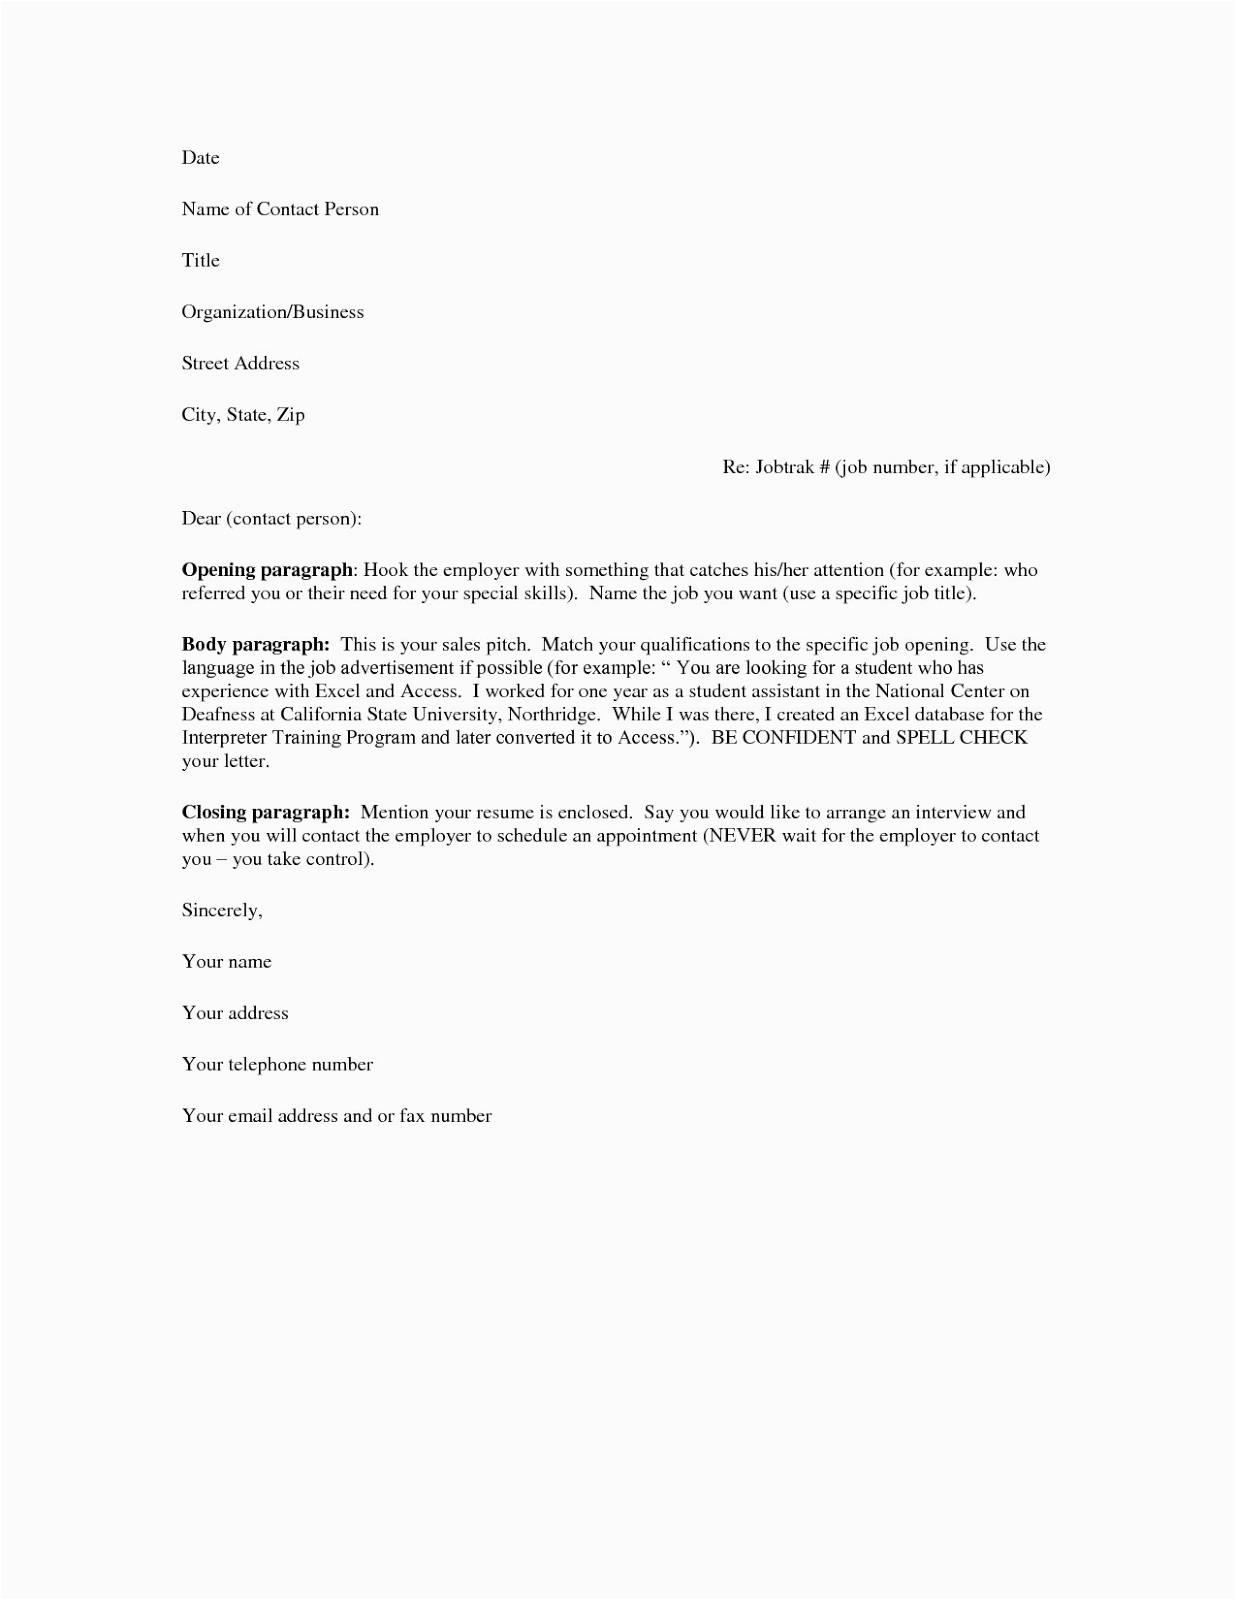 Free Resume Cover Letter Examples Samples Free Cover Letter Samples for Resumes